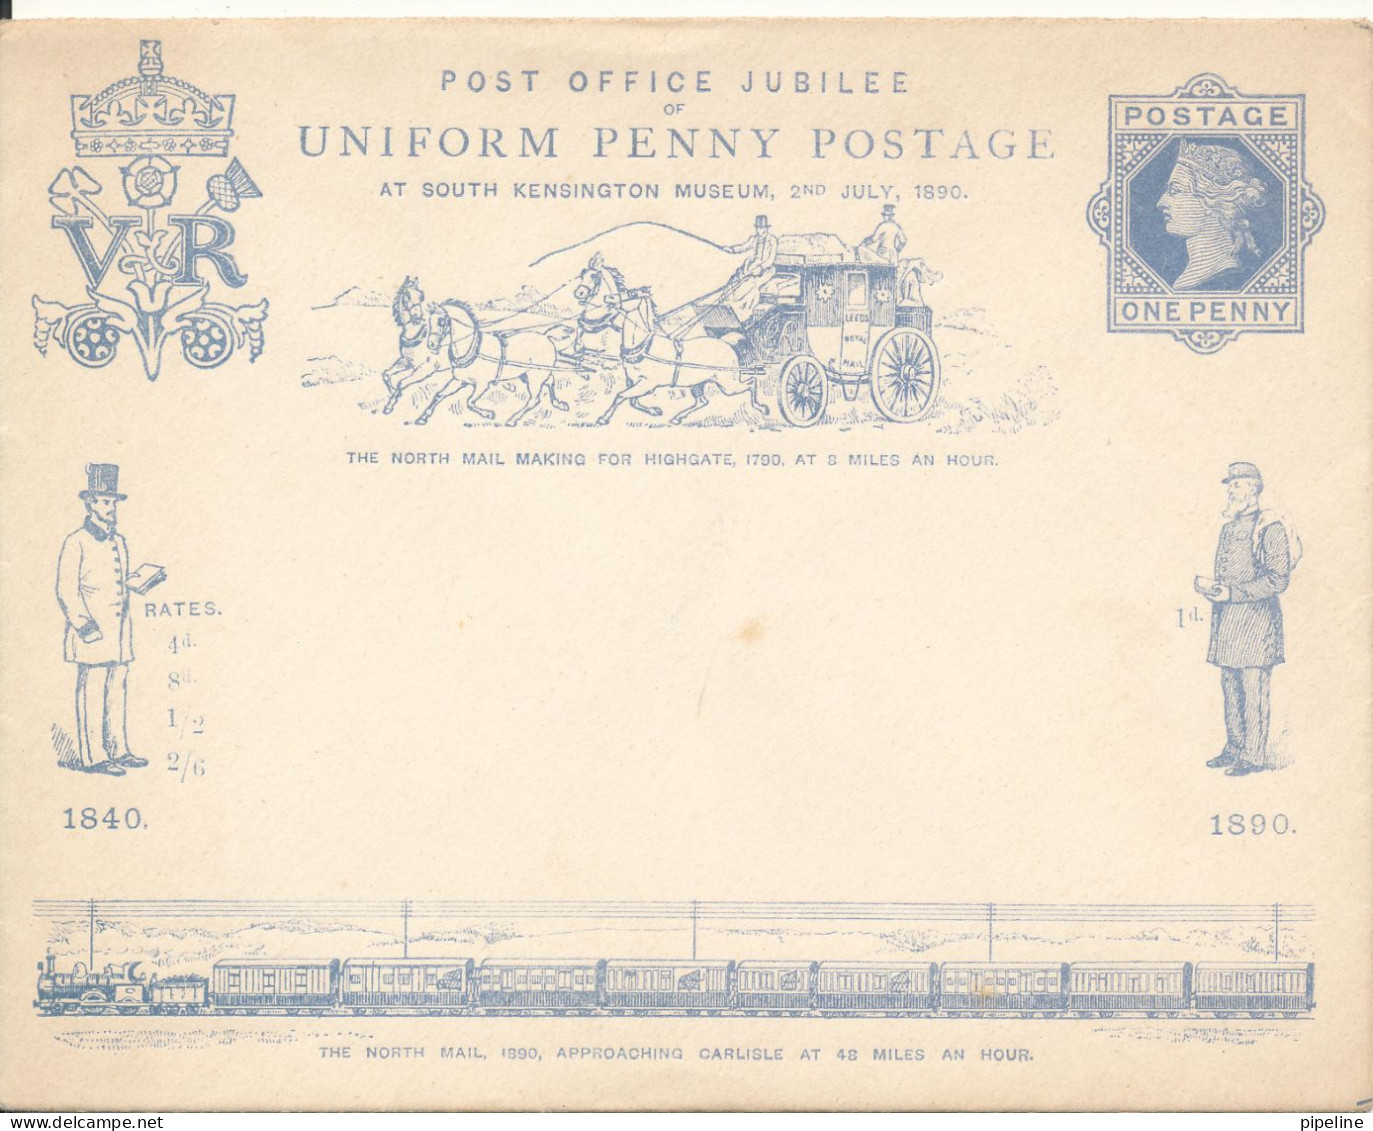 Great Britain Unused Postal Stationery 1890 Post Office Jubilee Uniform Penny Postage With Cachet - Material Postal